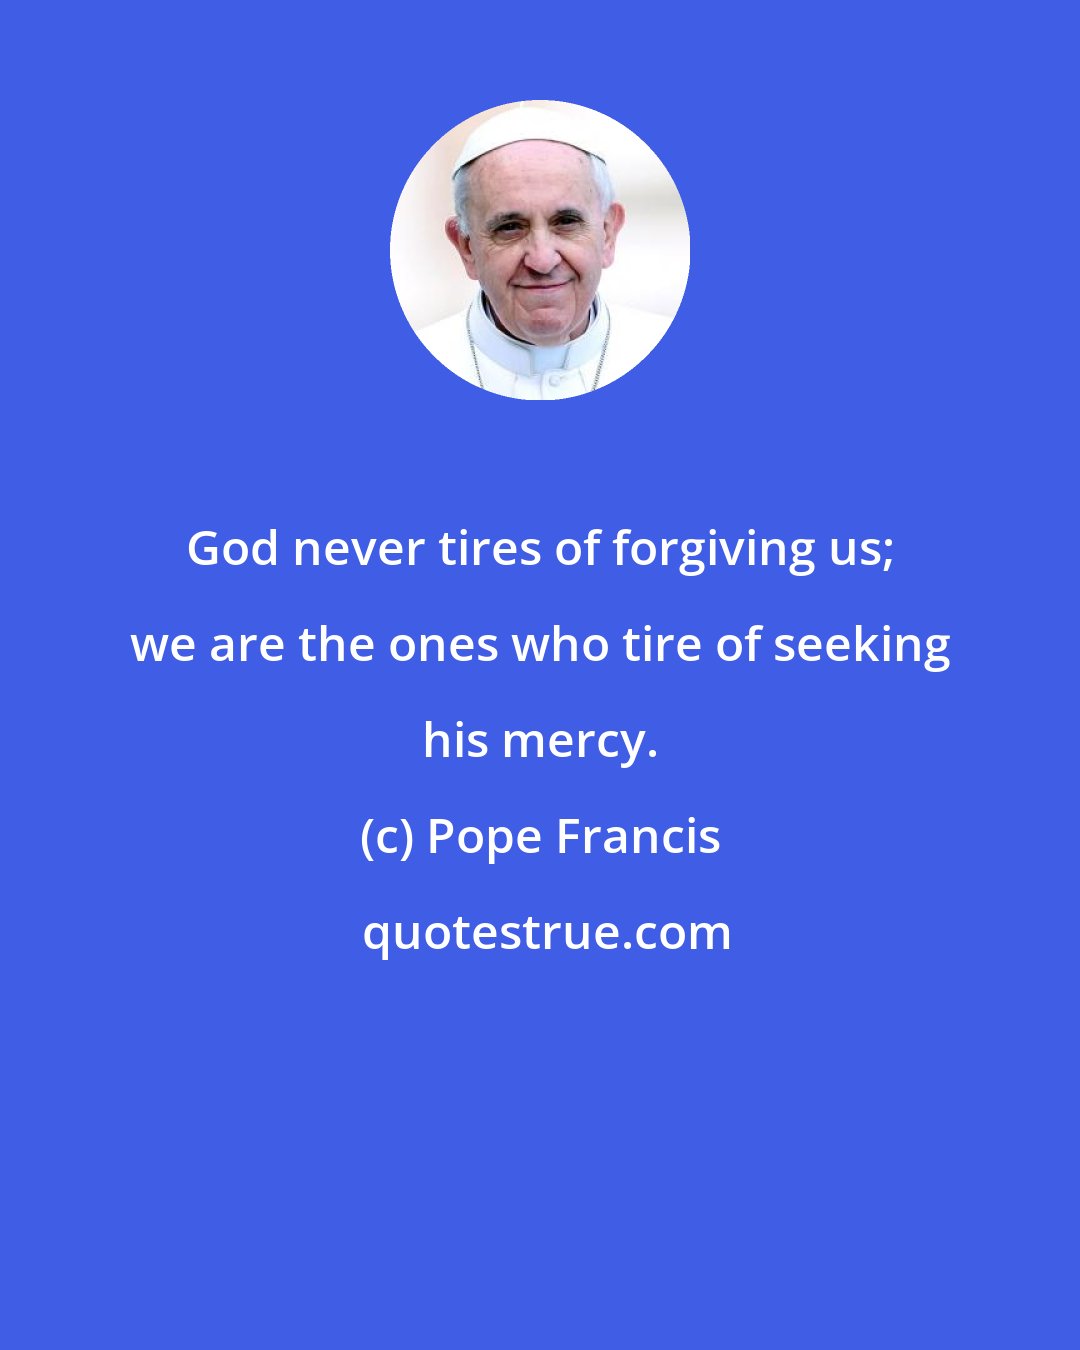 Pope Francis: God never tires of forgiving us; we are the ones who tire of seeking his mercy.